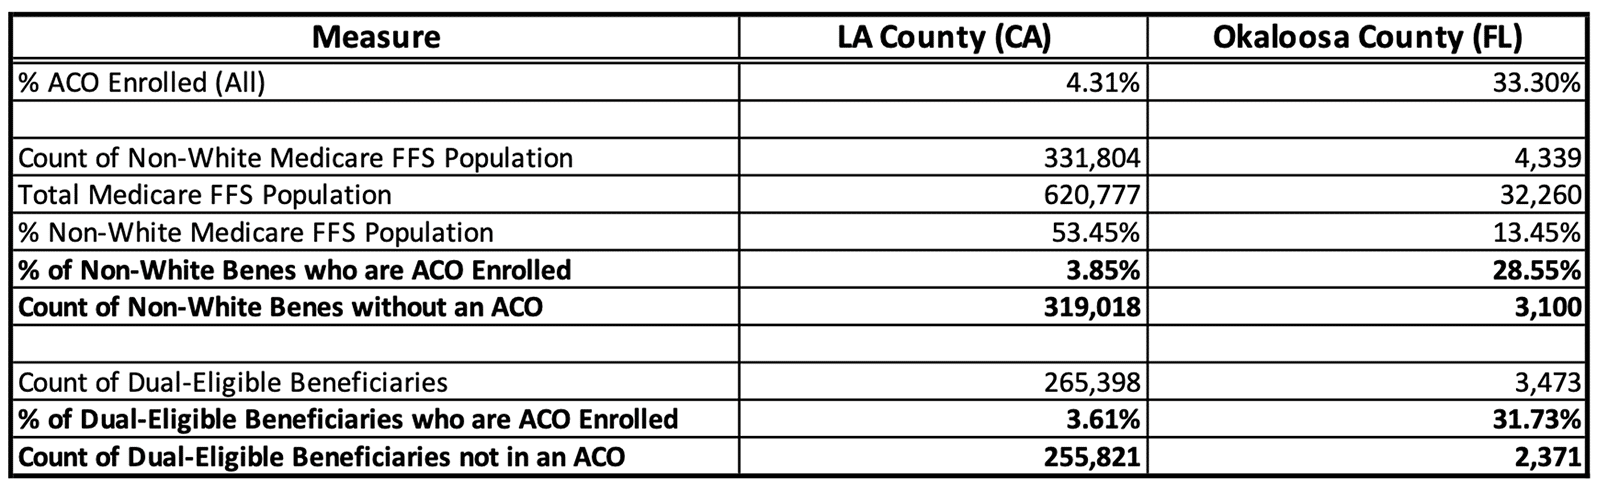 Figure 8 Underserved Beneficiary Comparison - LA County and Okaloosa County. Data sourced from CareJourney.